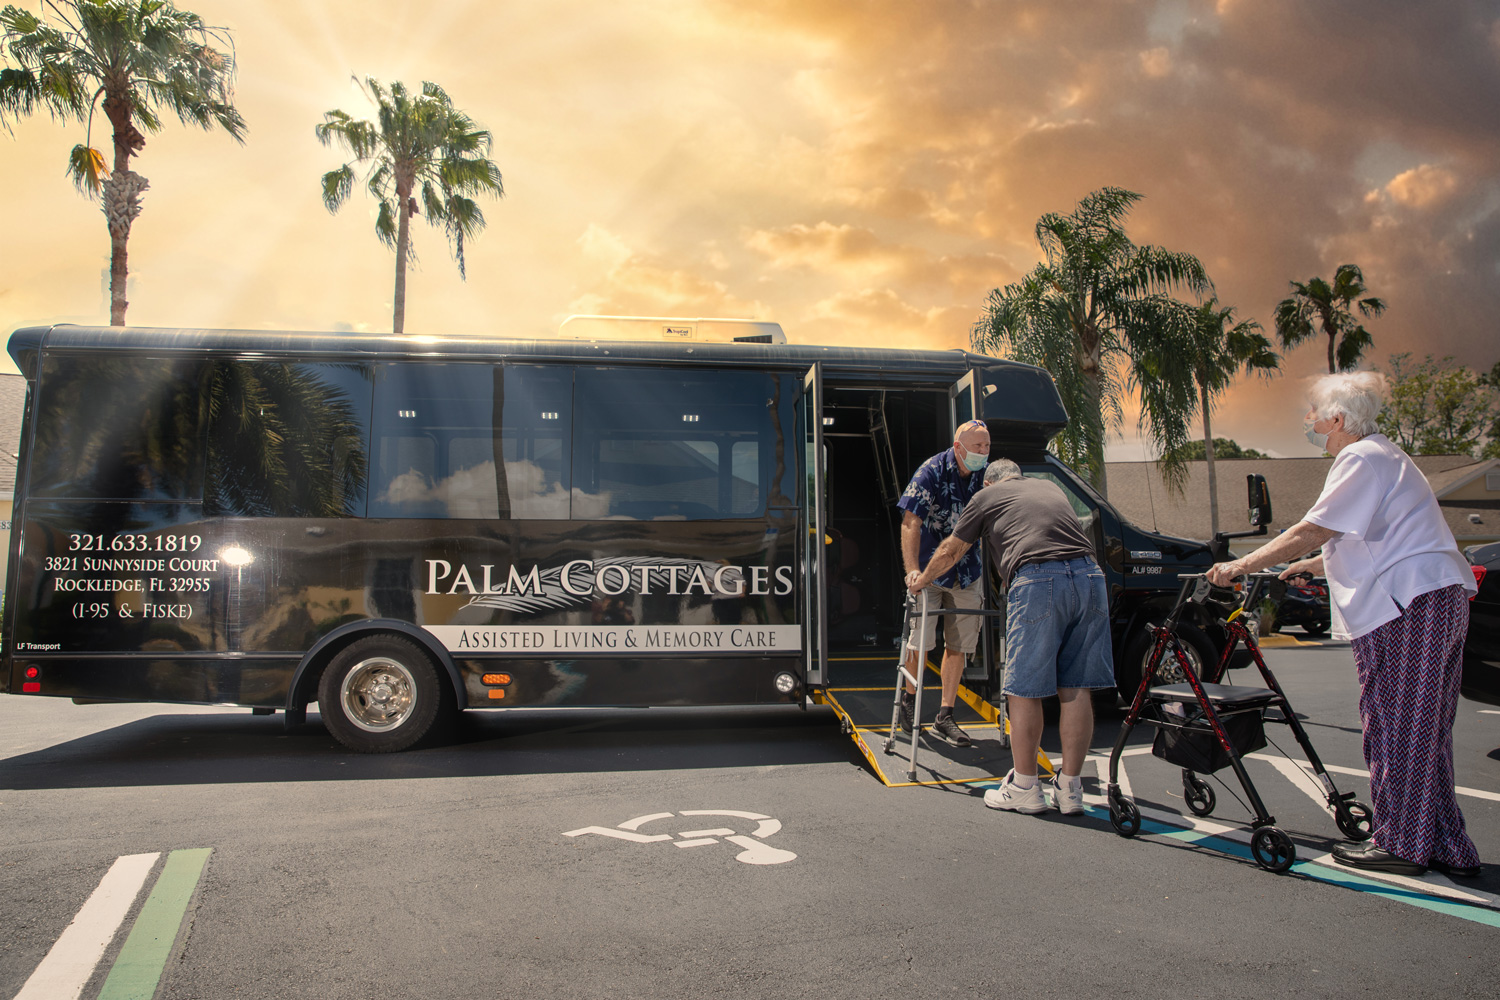 assisted living residents boarding palm cottages bus for outting